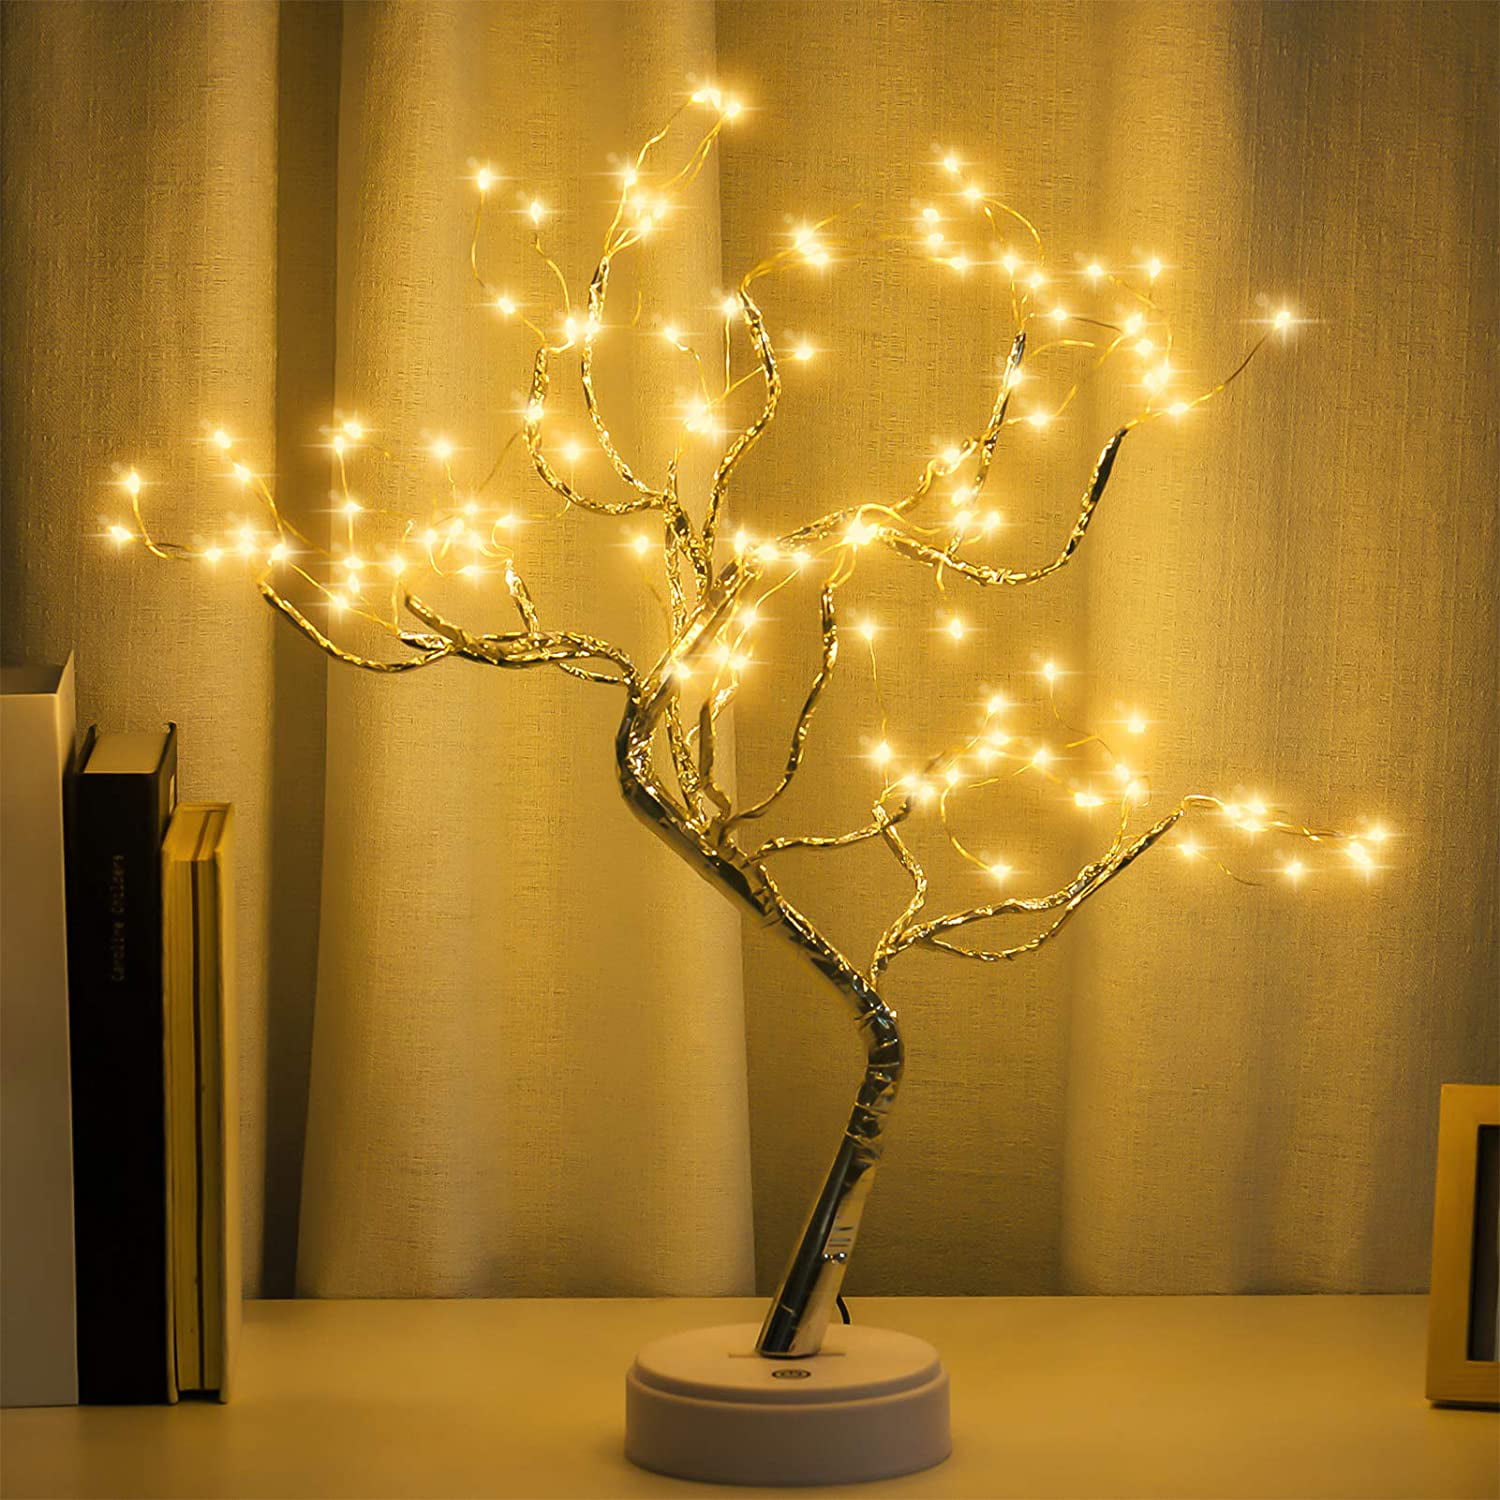 Battery Powered USB LED Fairy Tree Light Copper Wire Home Party Xmas Decor Lamp 